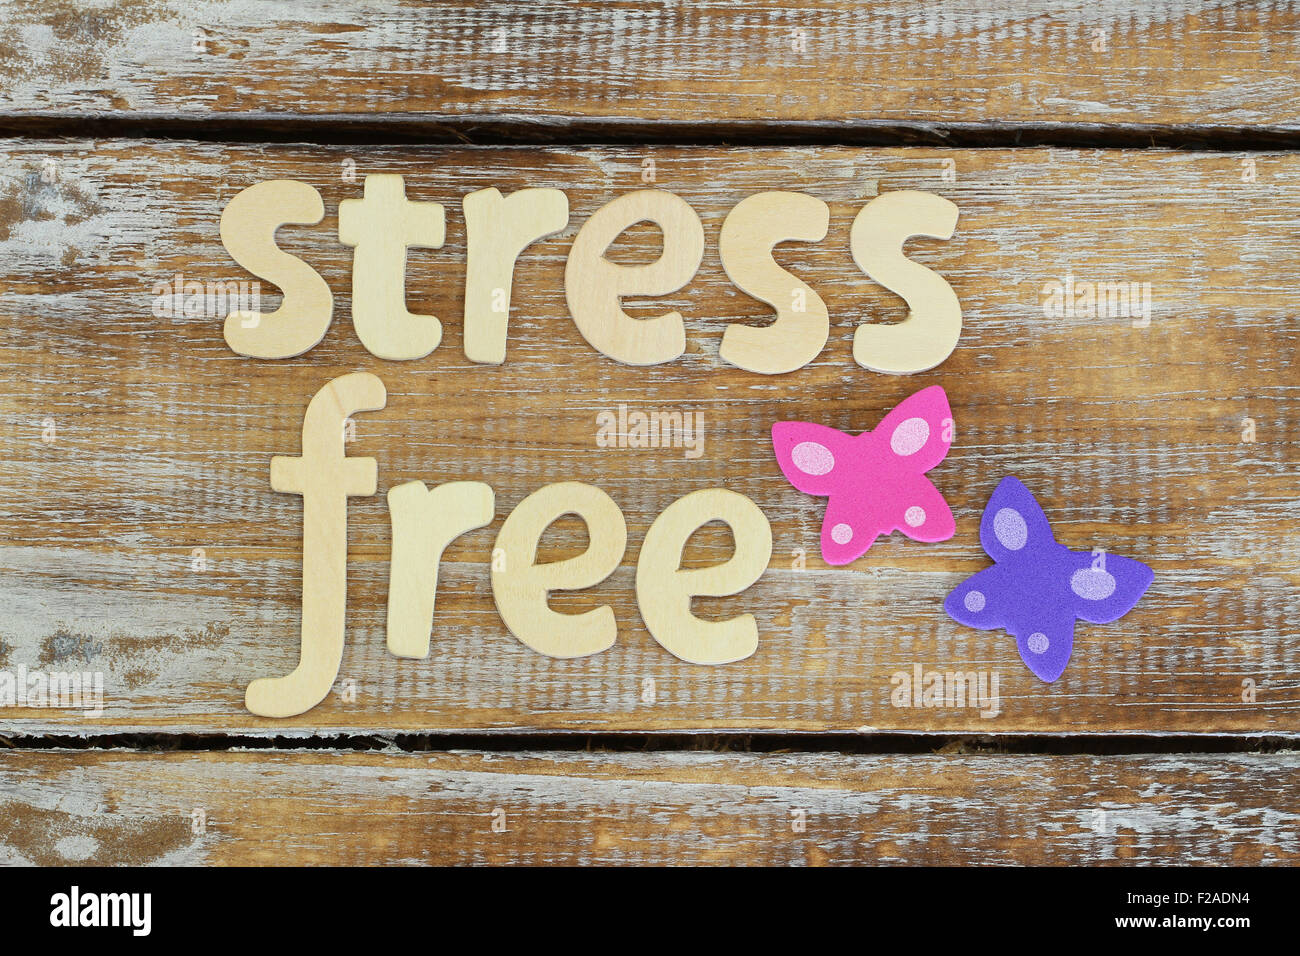 Stress free written with wooden letters on rustic surface Stock Photo